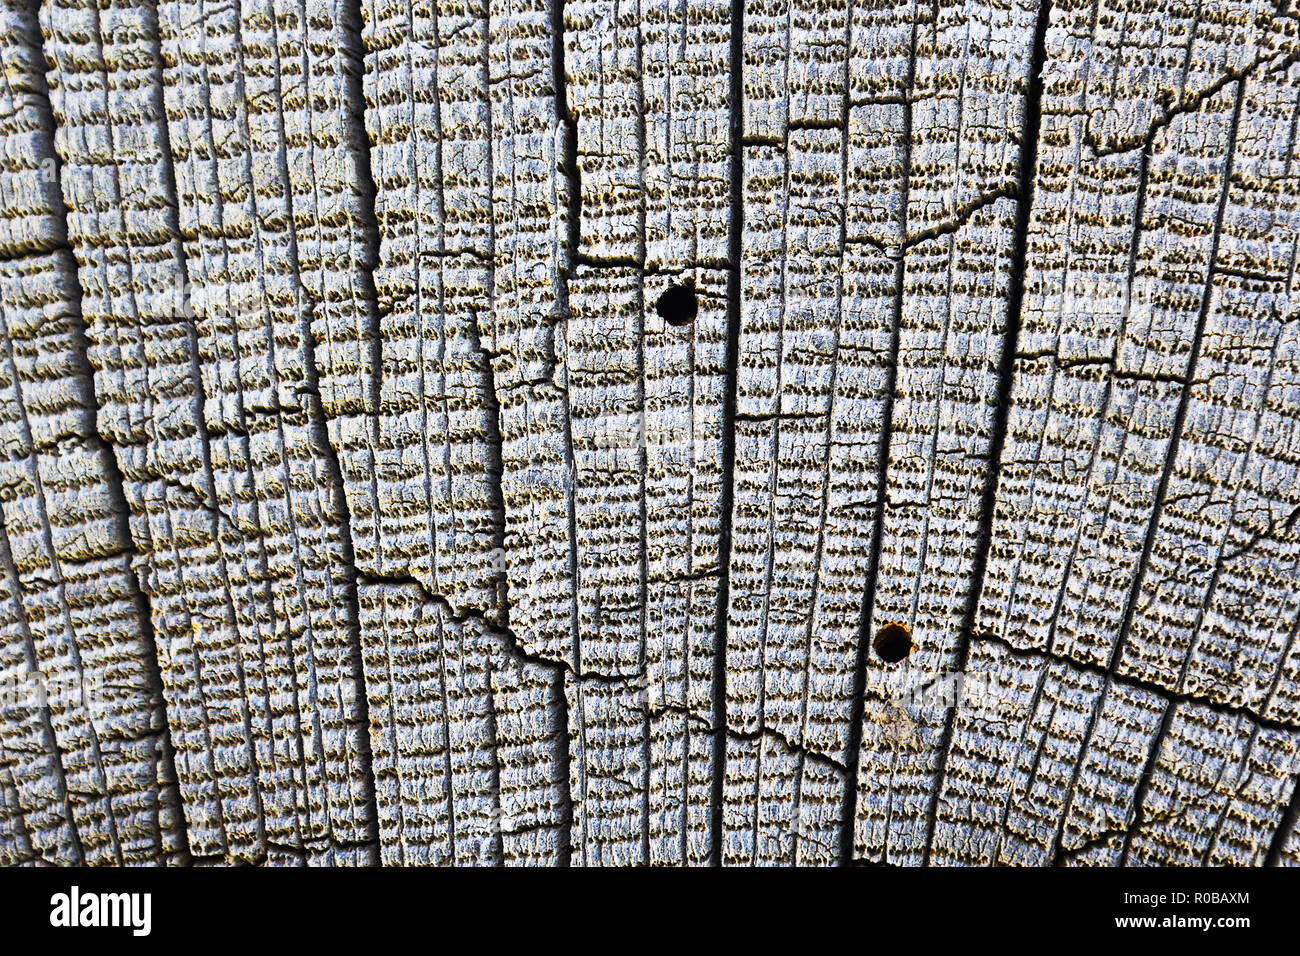 detail of wood borers attack on oak old plank Stock Photo